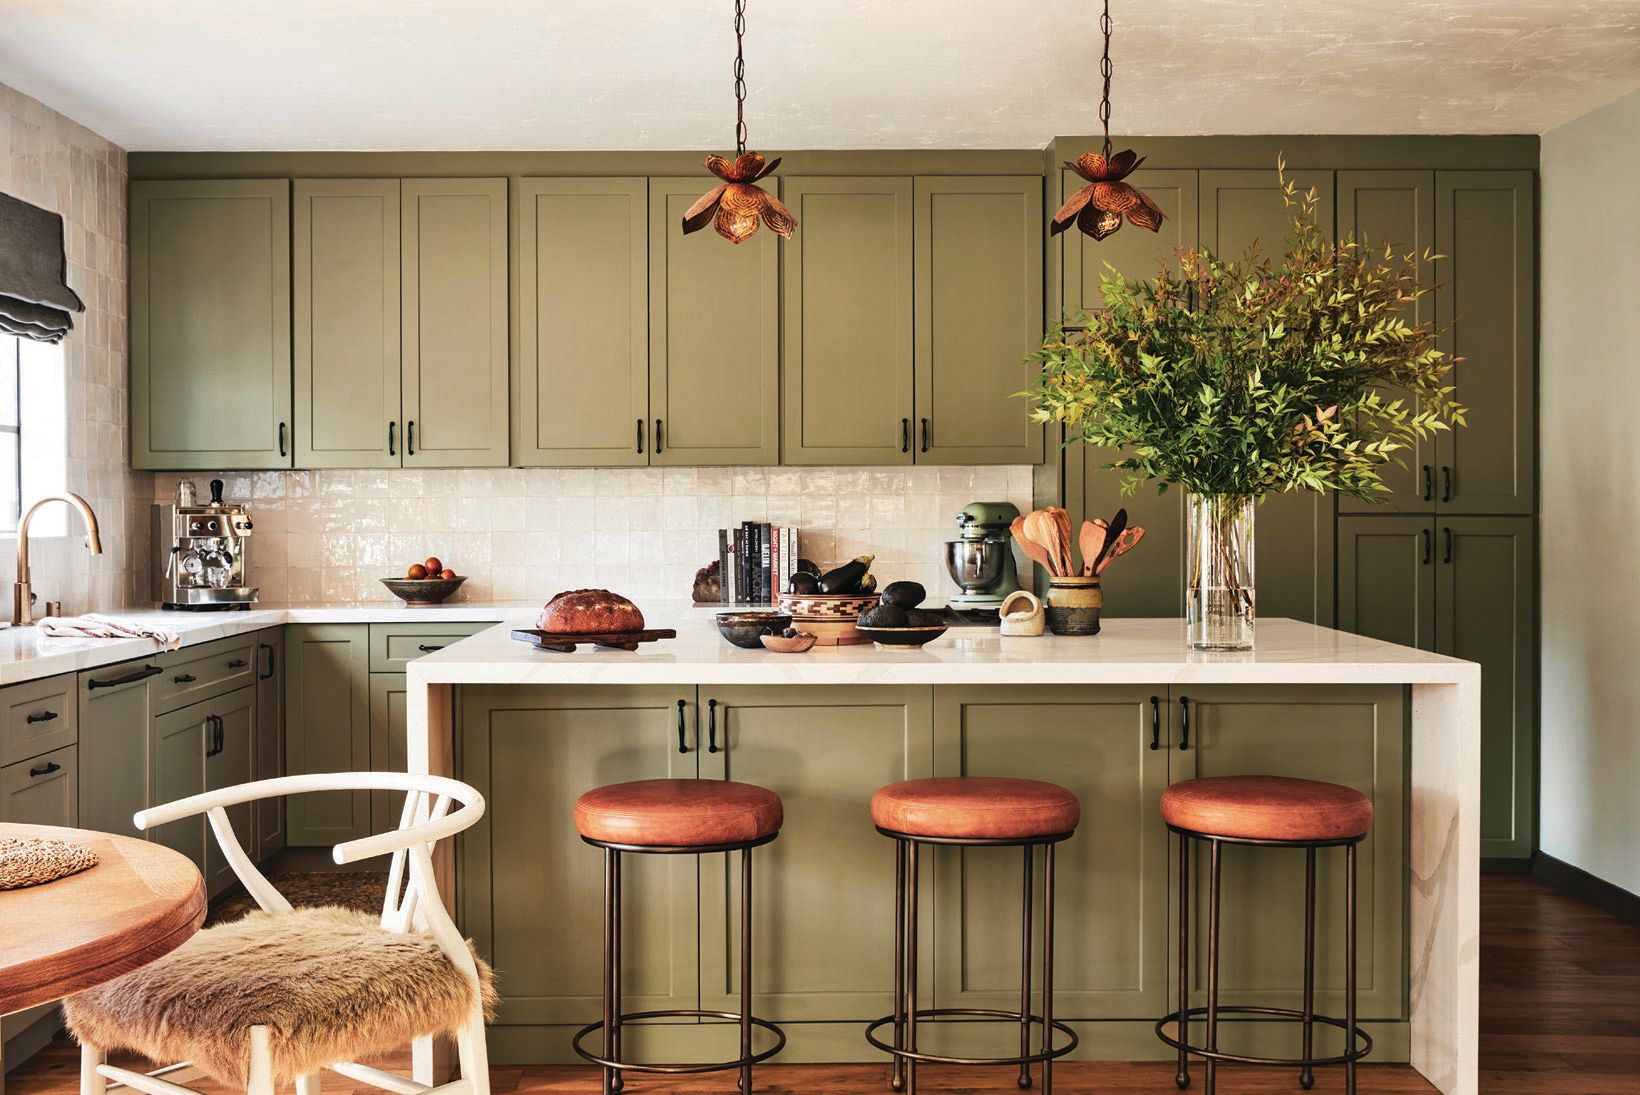 The kitchen’s Lawson-Fenning Orsini counter stools mingle with a vintage French breakfast table and cabinets painted in a custom shade by Portola Paints & Glazes. Photographed By Sam Frost